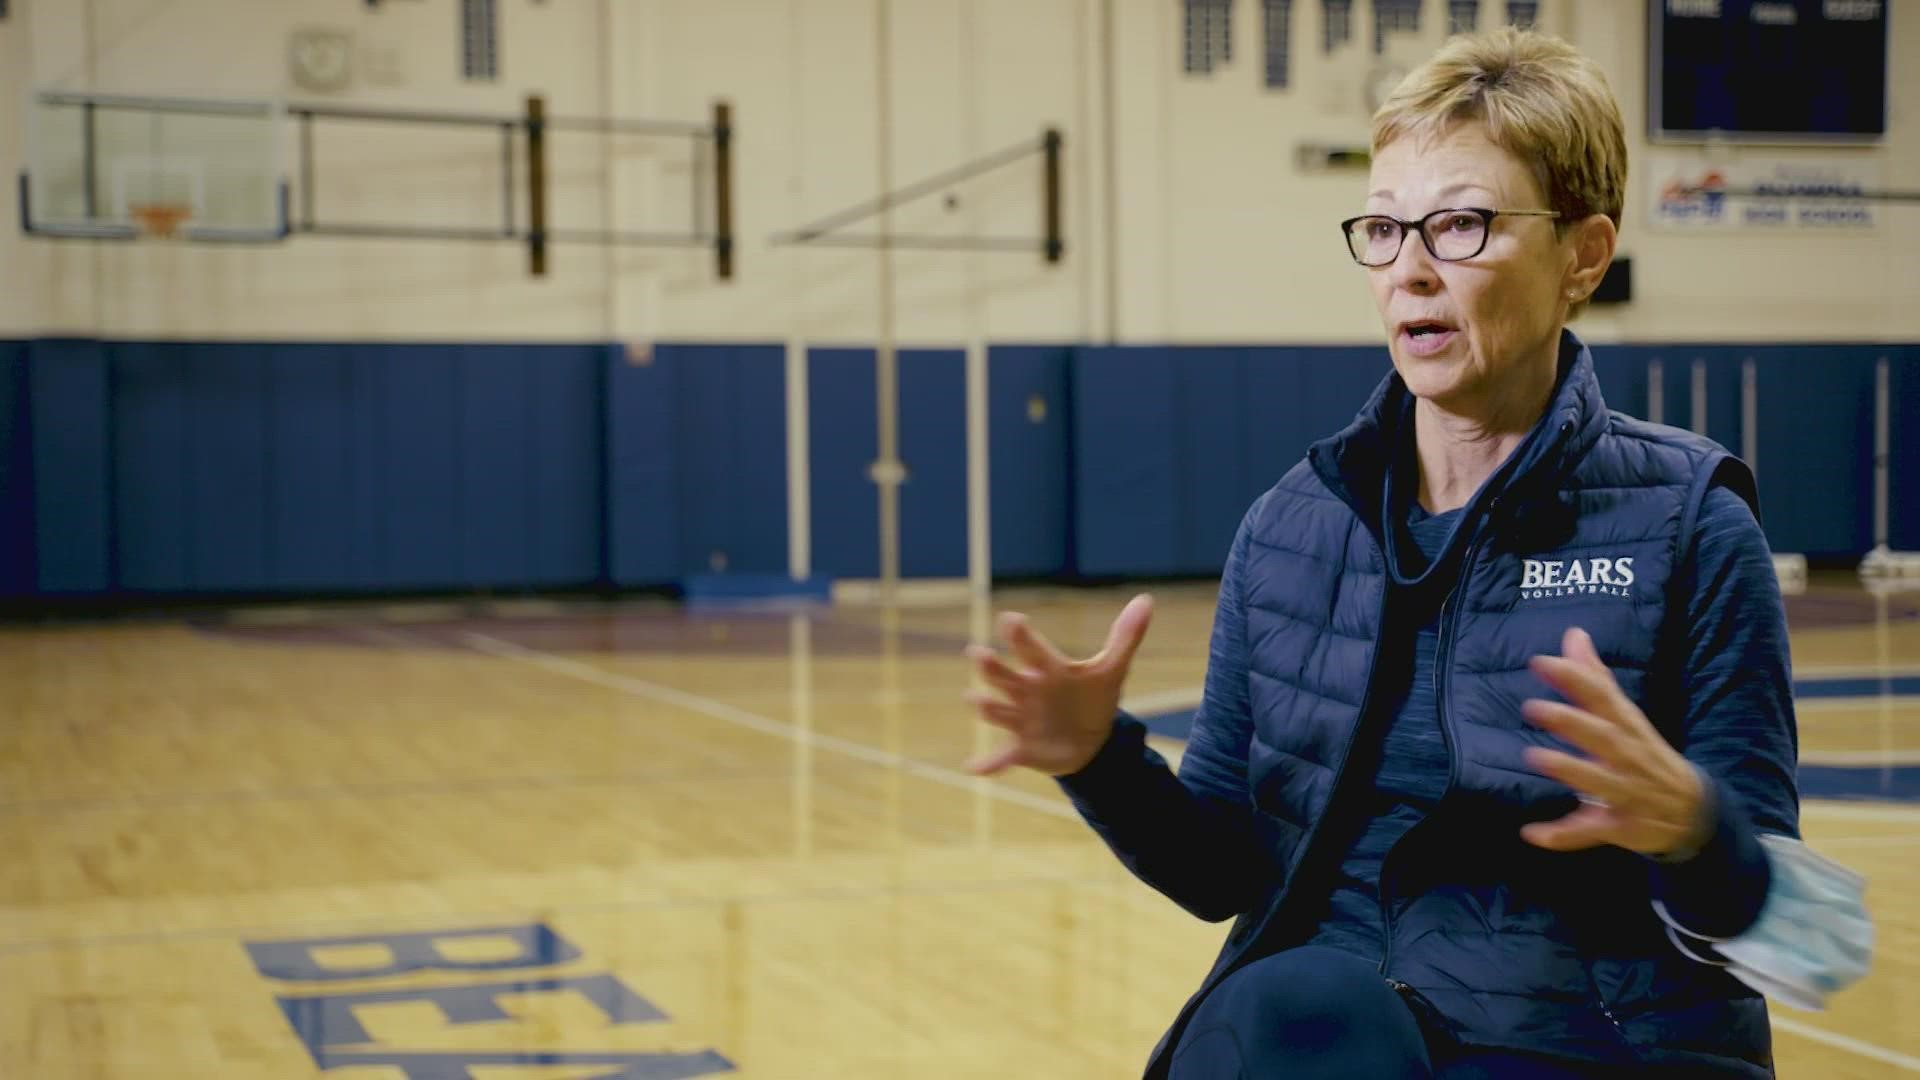 Laurie Creighton first started coaching in 1978 and has led teams to 879 wins.